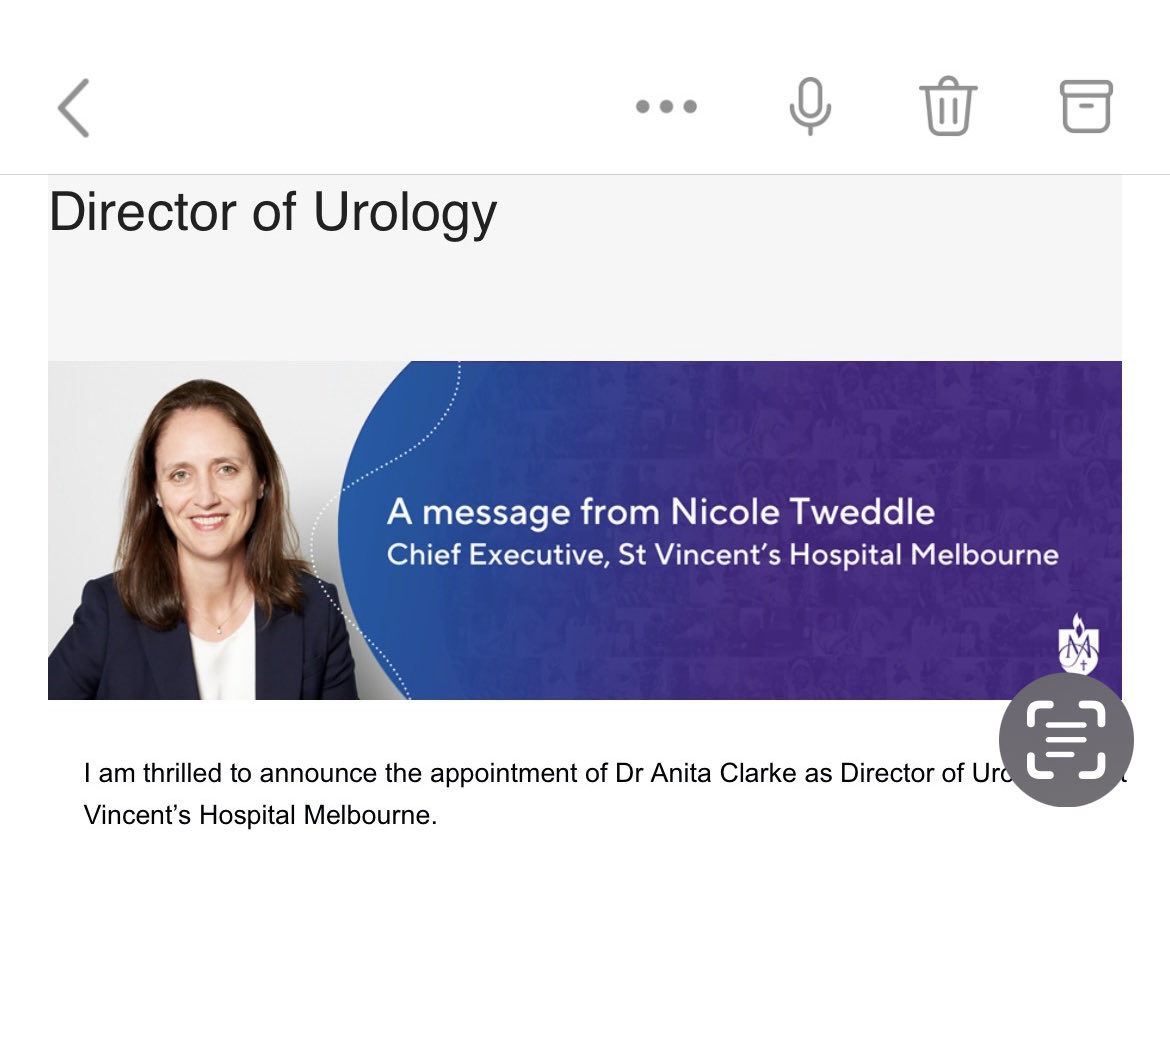 Very excited to be appointed Director of Urology at my alma mater. So looking forward to leading a wonderful team in this great specialty